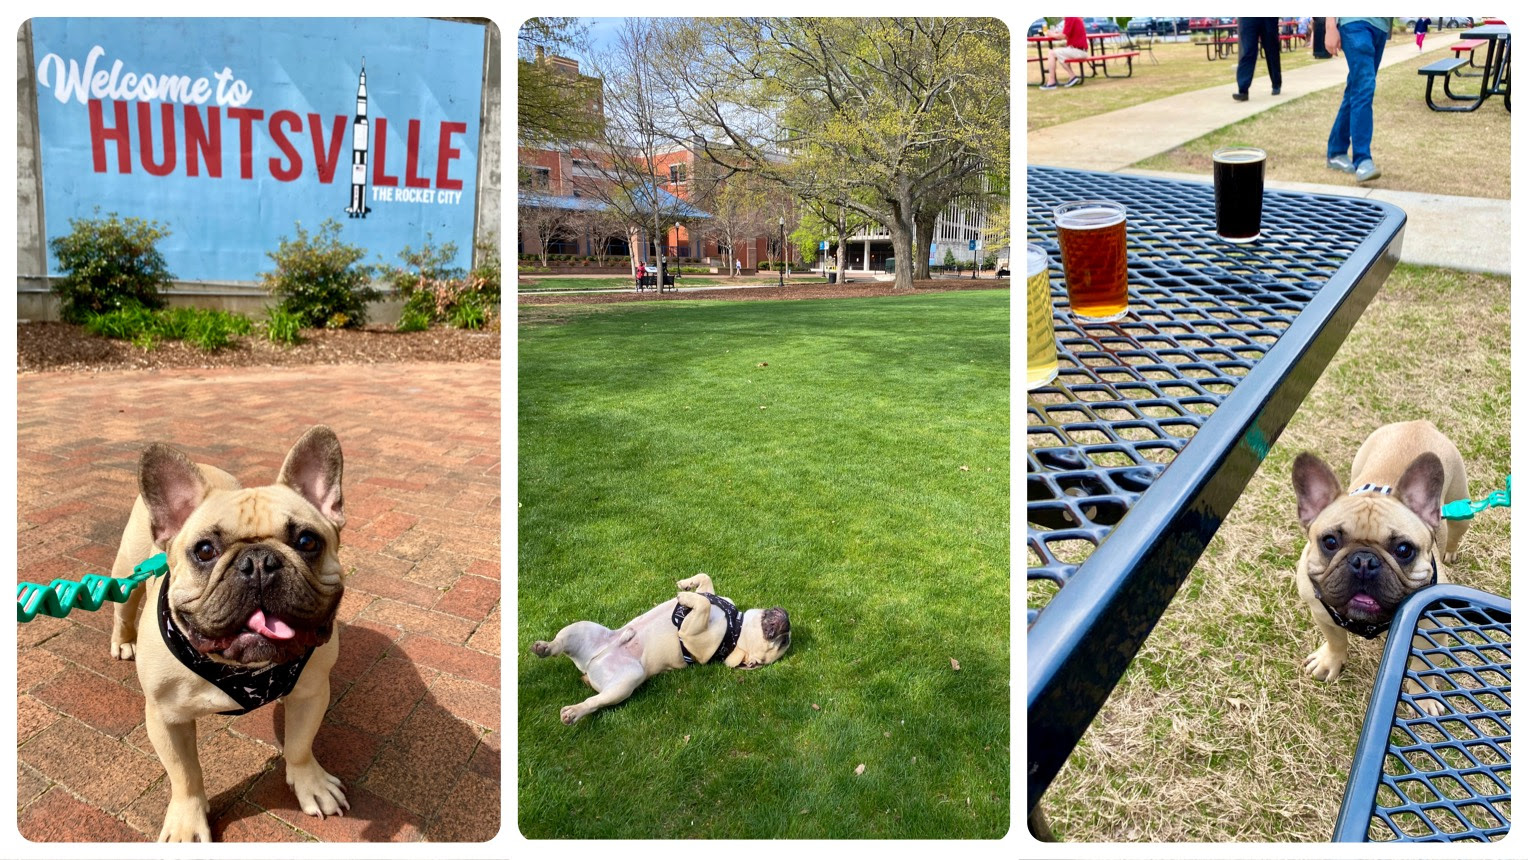 How to spend a dogfriendly day in Huntsville Soul Grown